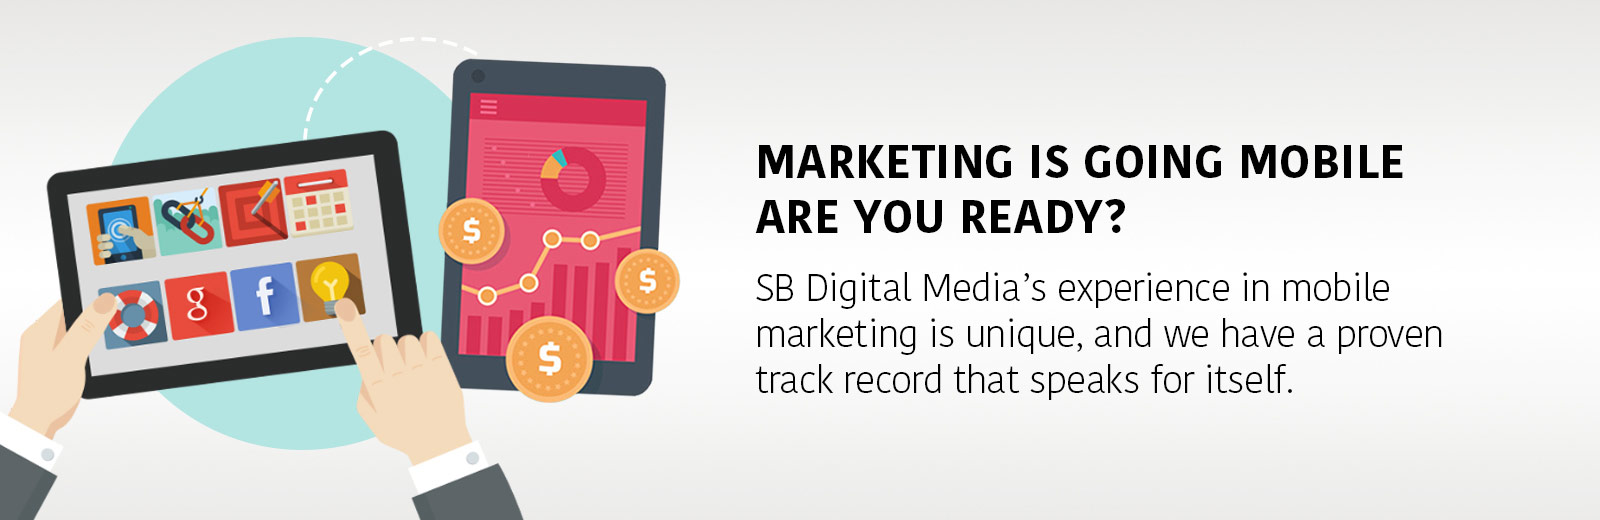 Marketing is going mobile, are you ready?